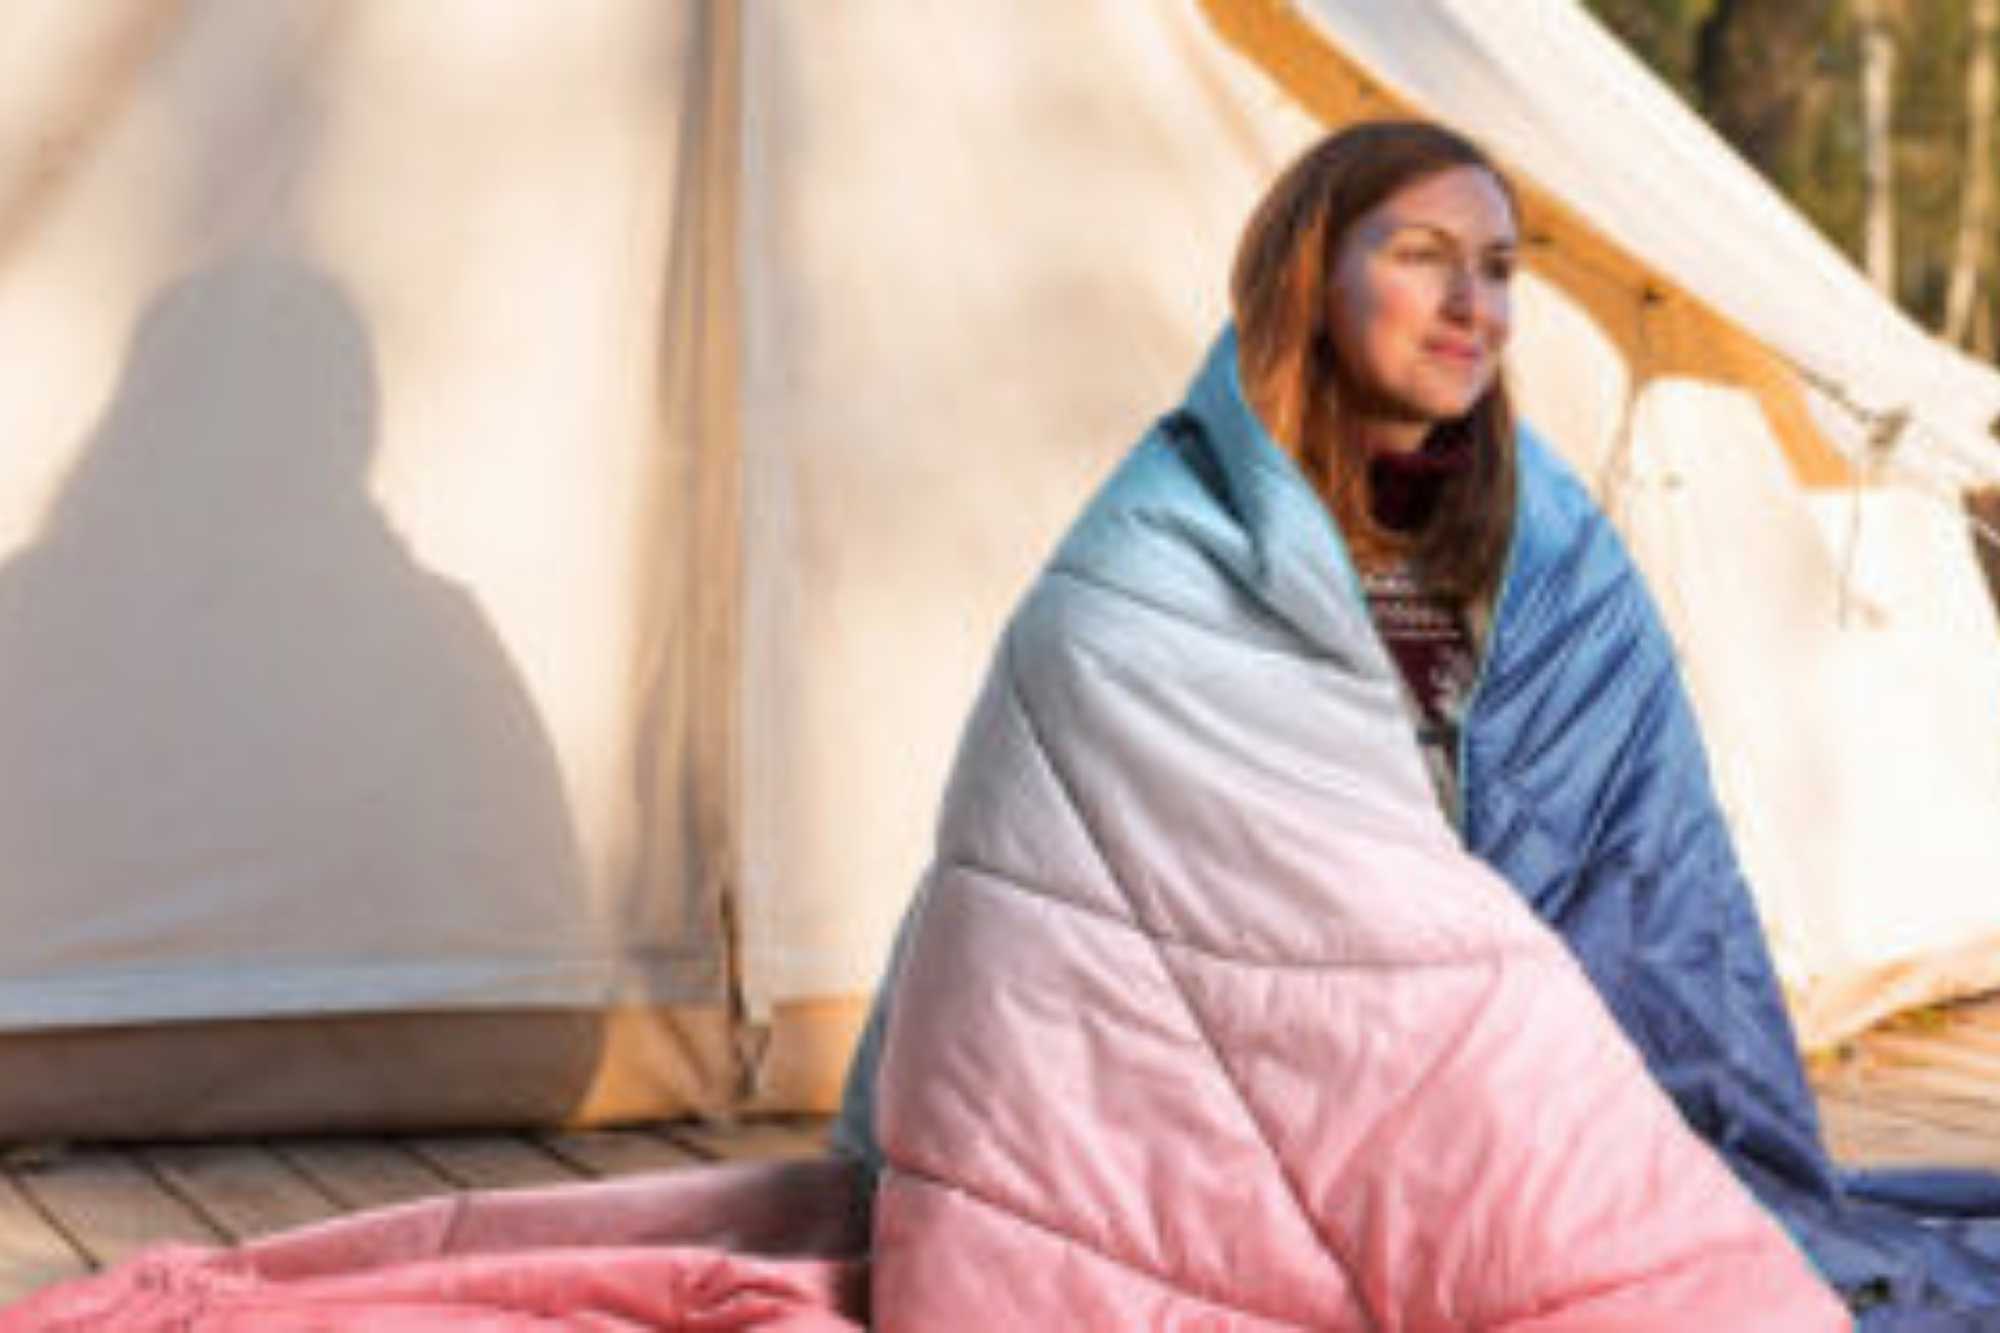 Camping blankets